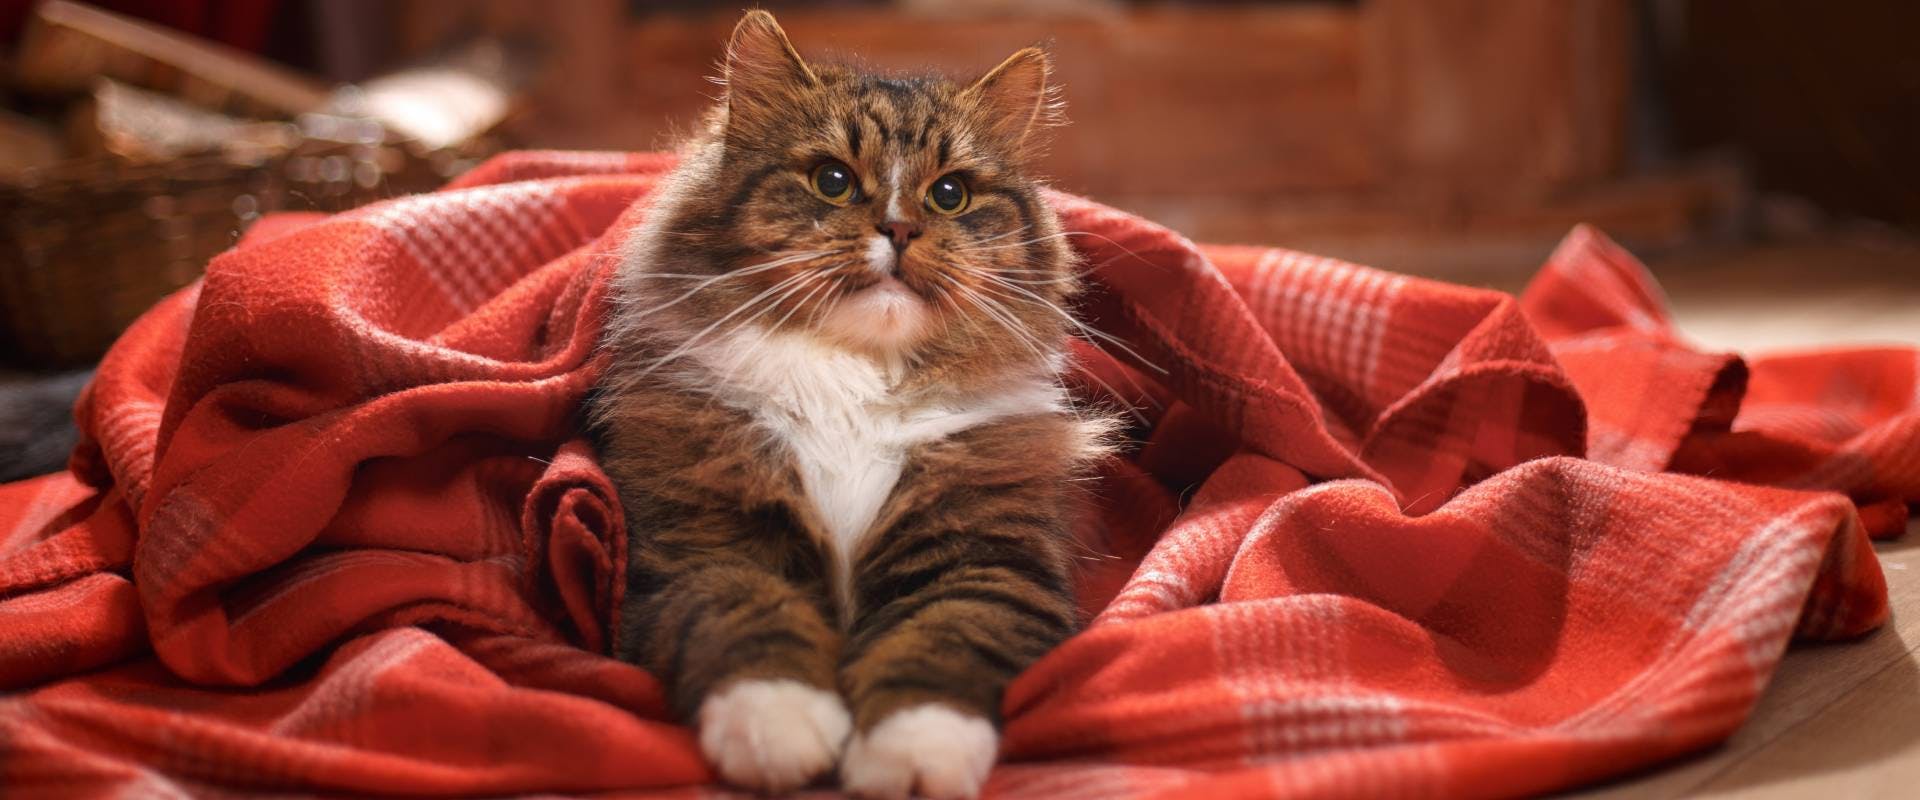 a longhaired tabby cat lying in a red blanket on the floor